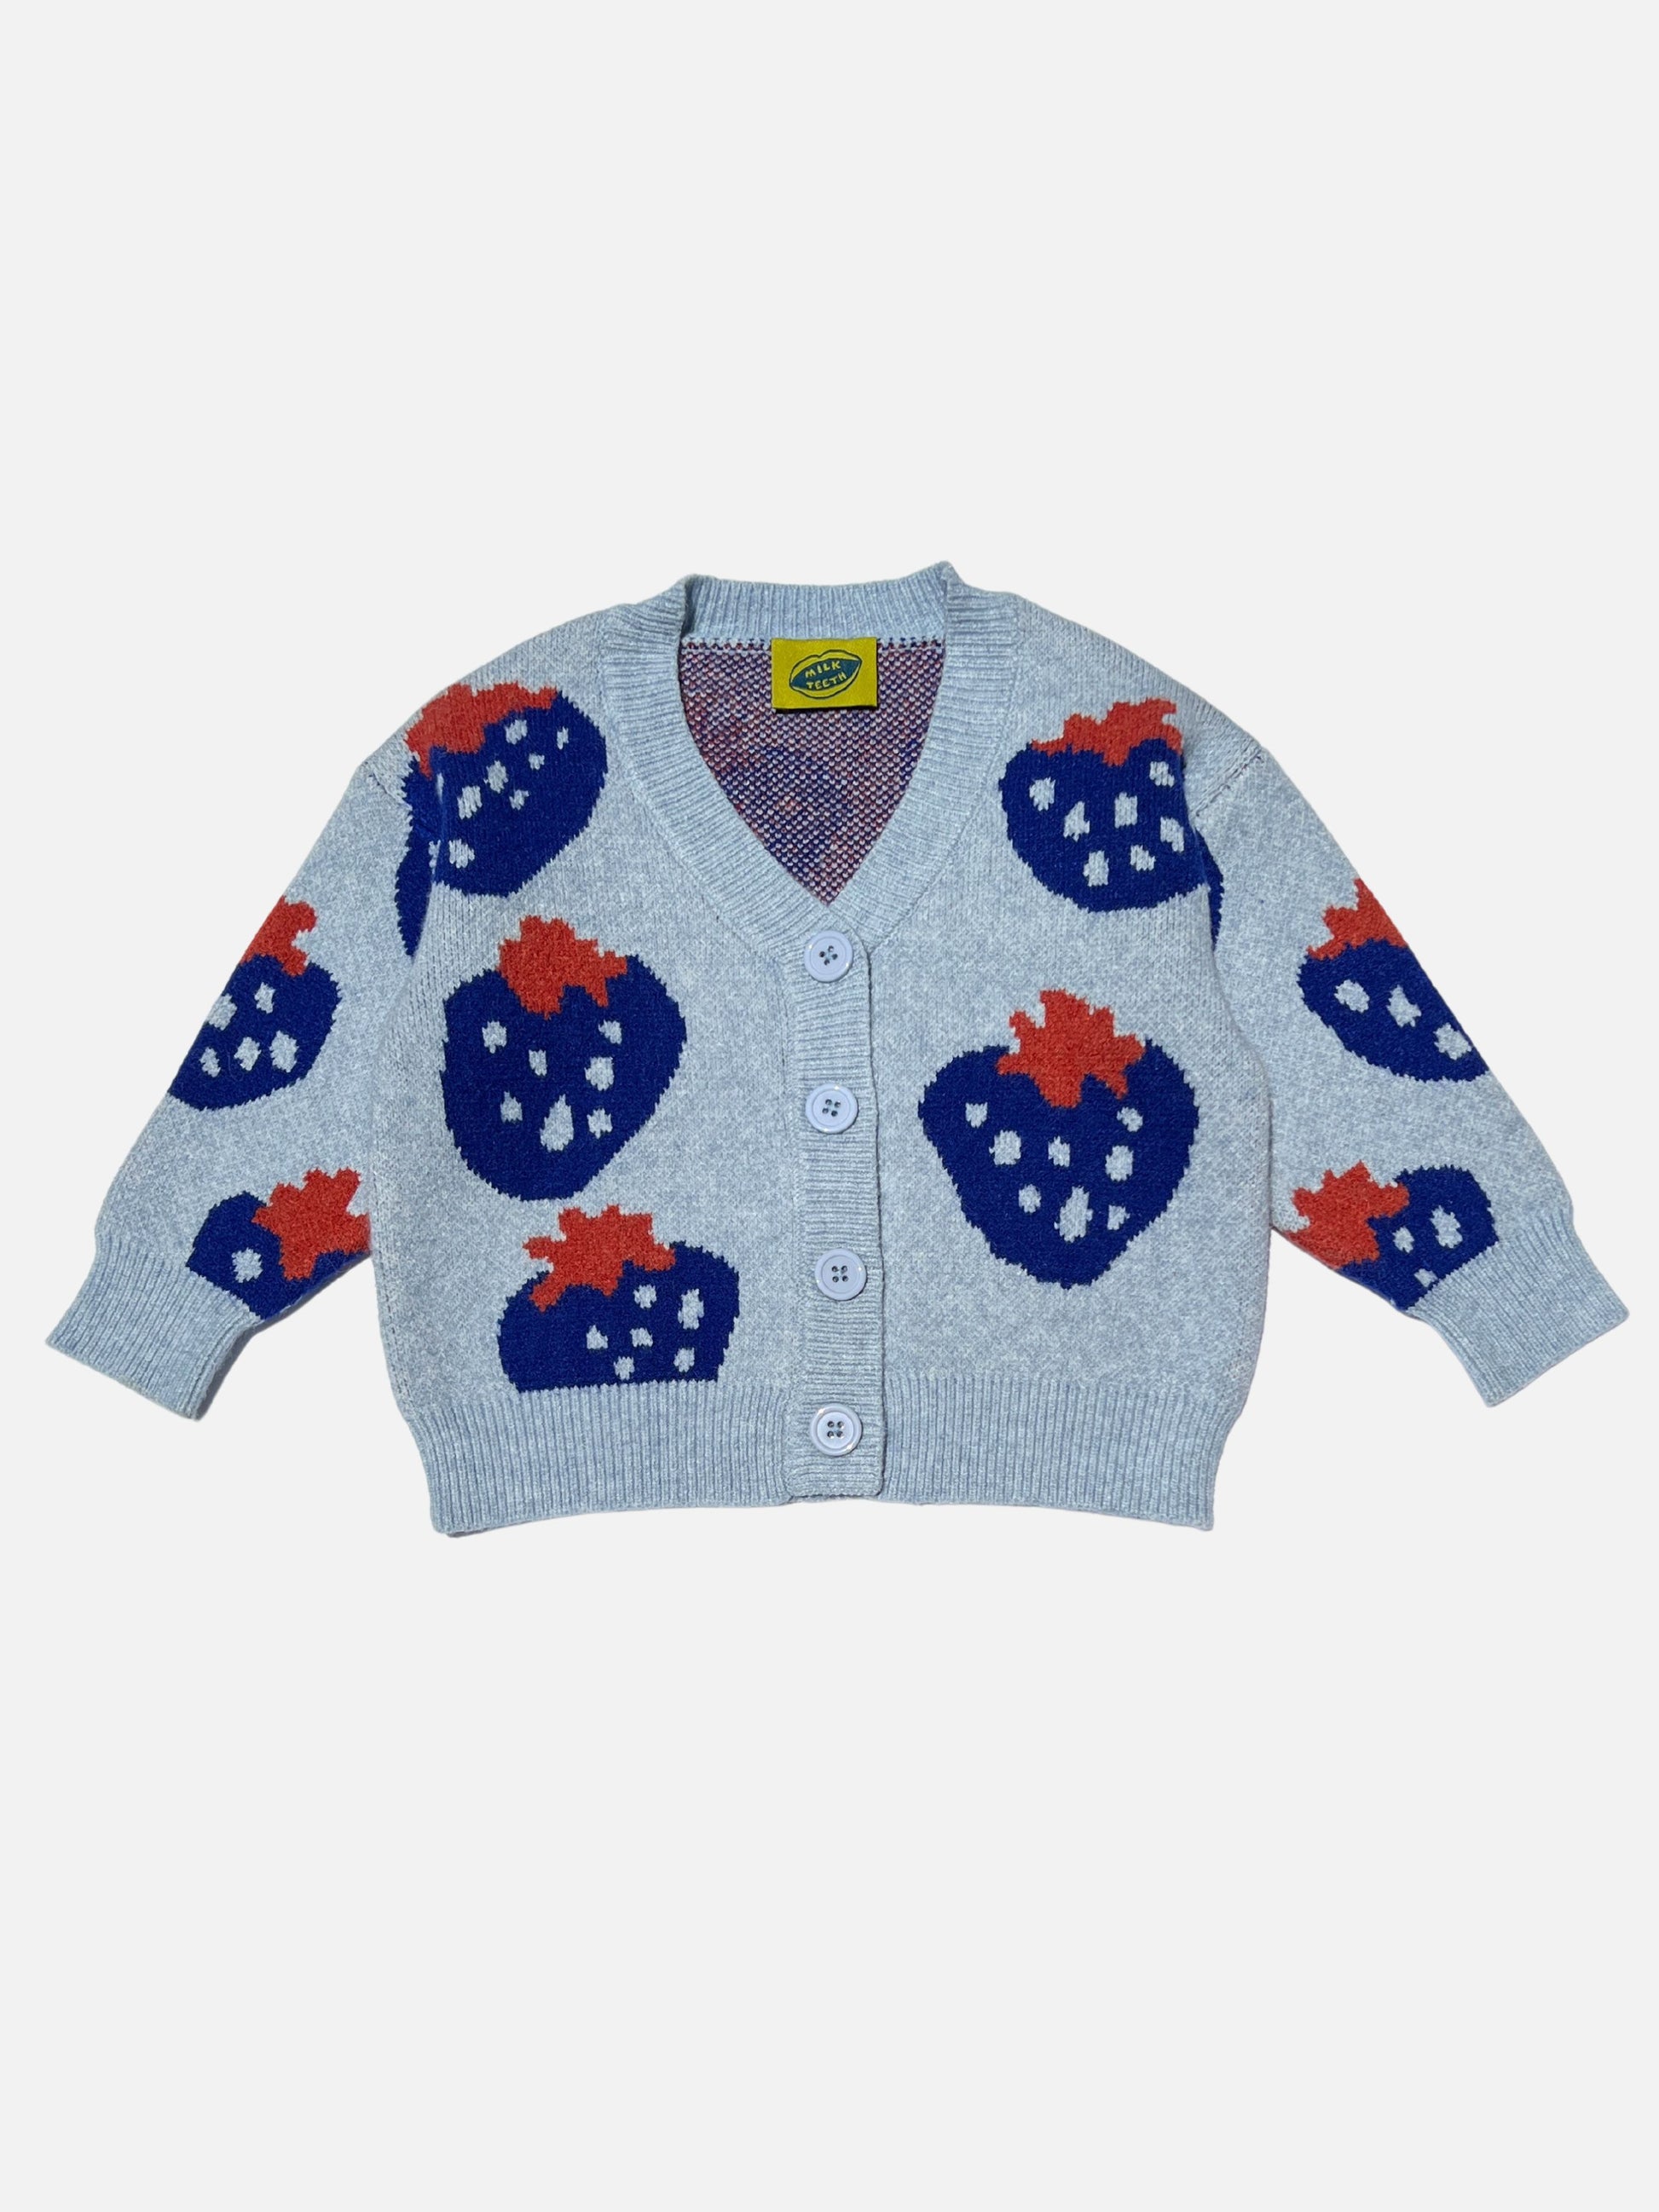 Front view of a kids v-neck cardigan in light blue with an all-over pattern of large blue strawberries with a red leaf. Cardigan has 4 buttons.